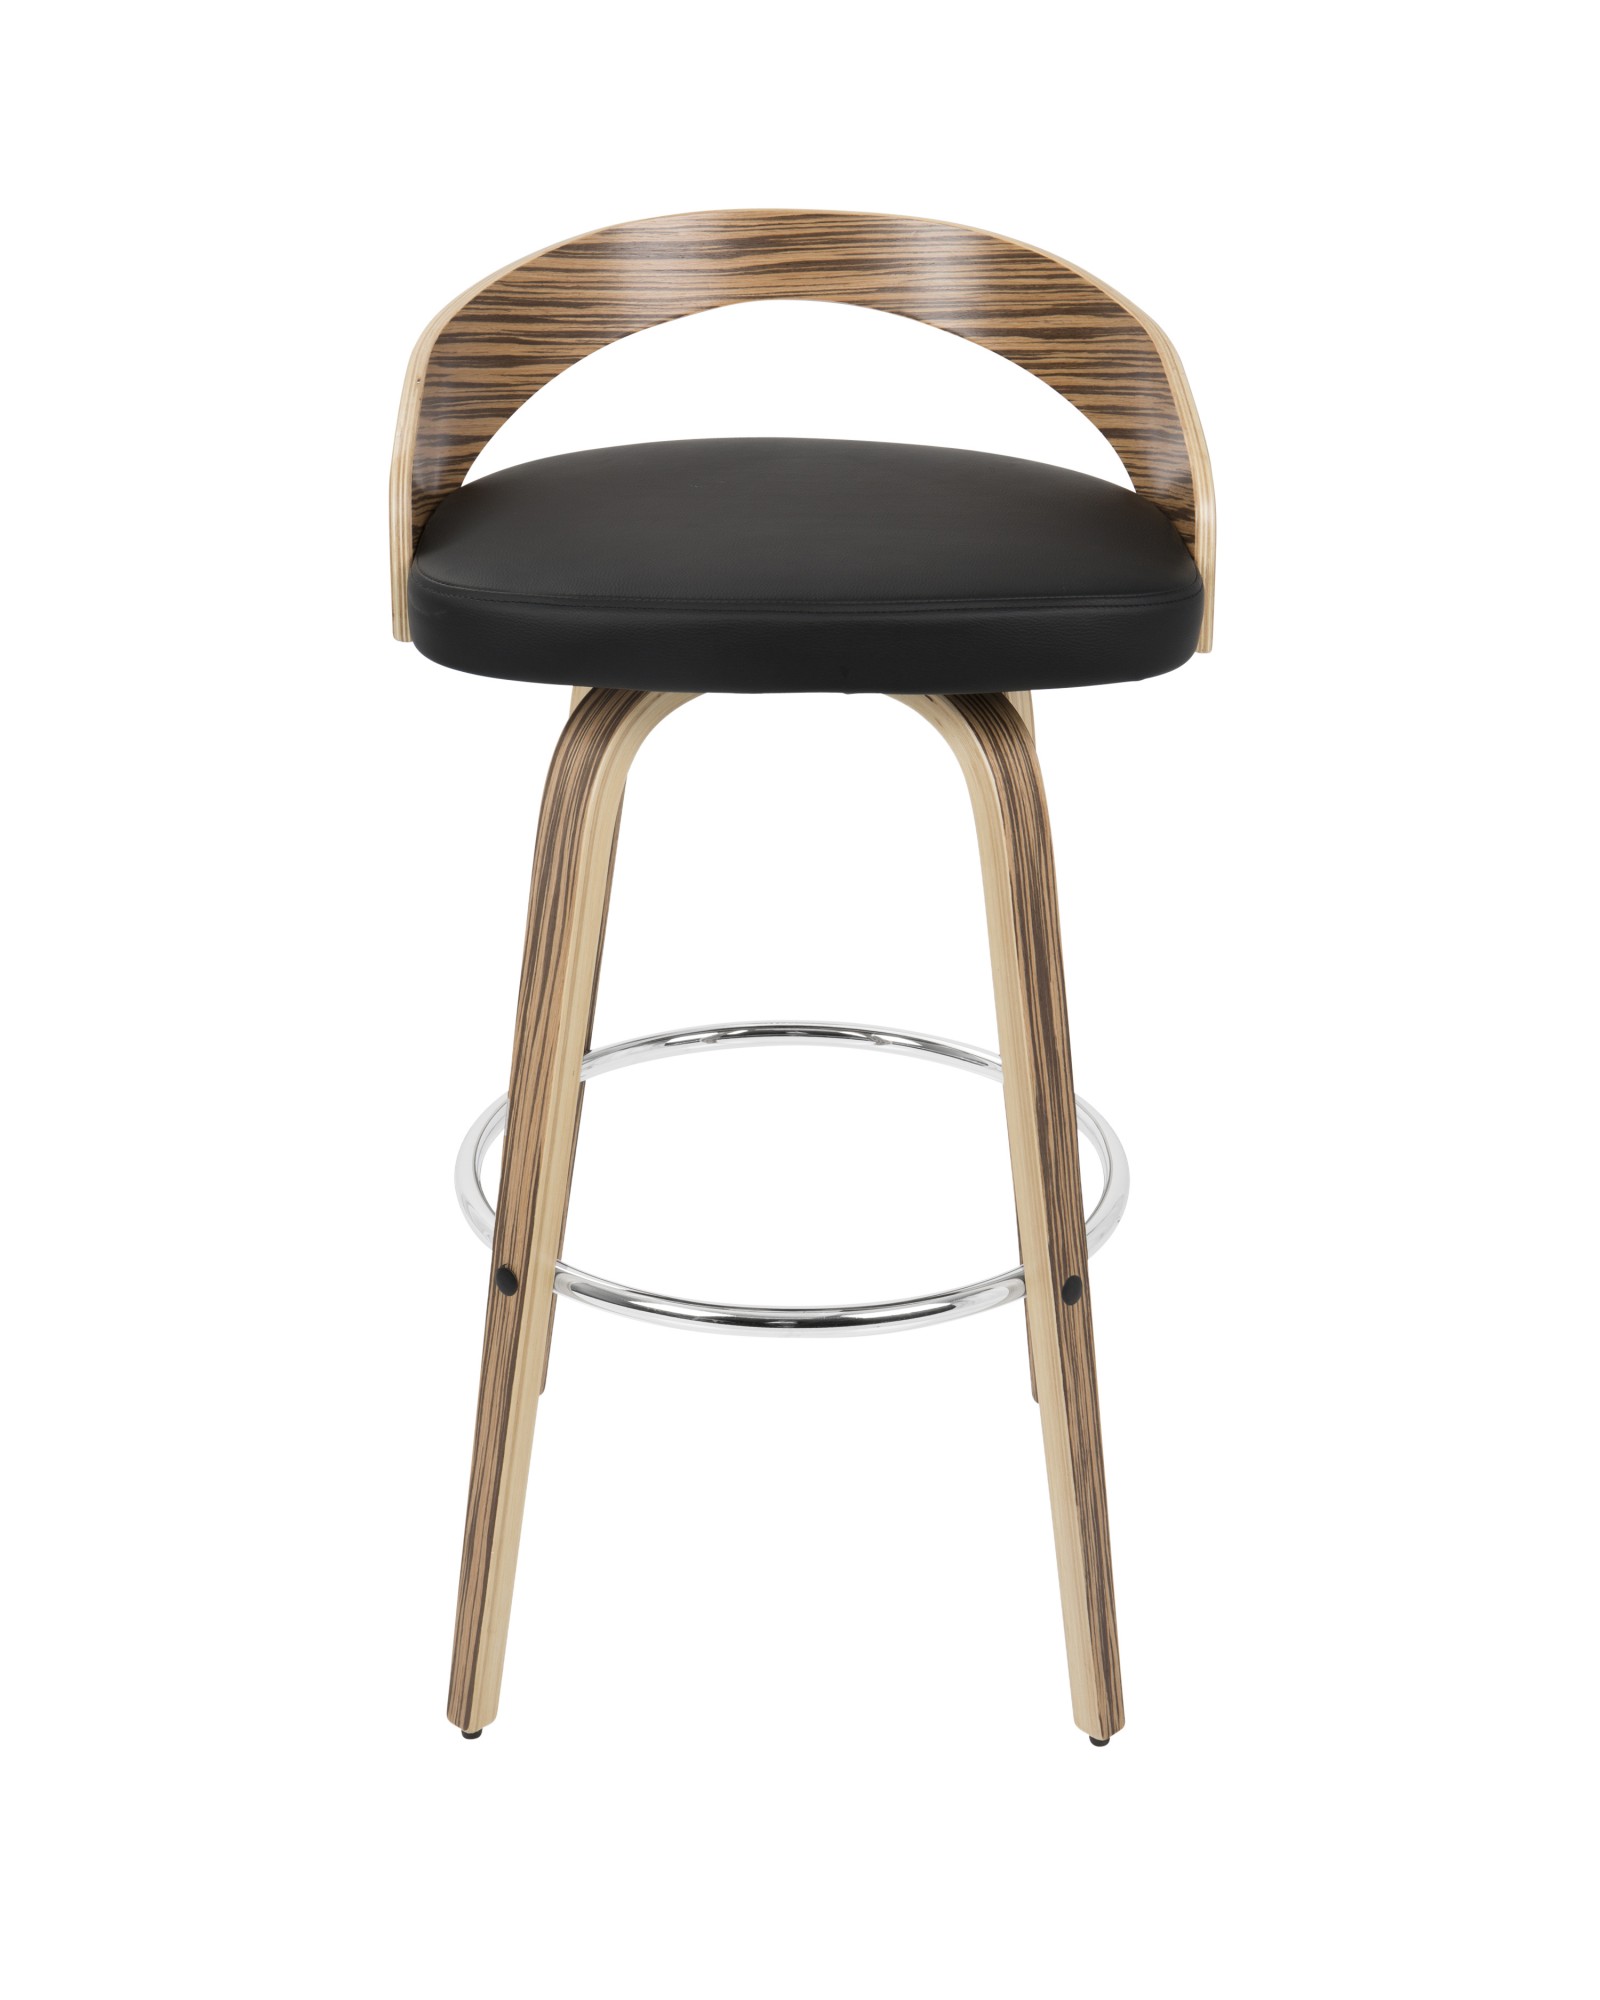 Grotto Mid-Century Modern Barstool with Swivel in Zebra Wood with Black Faux Leather